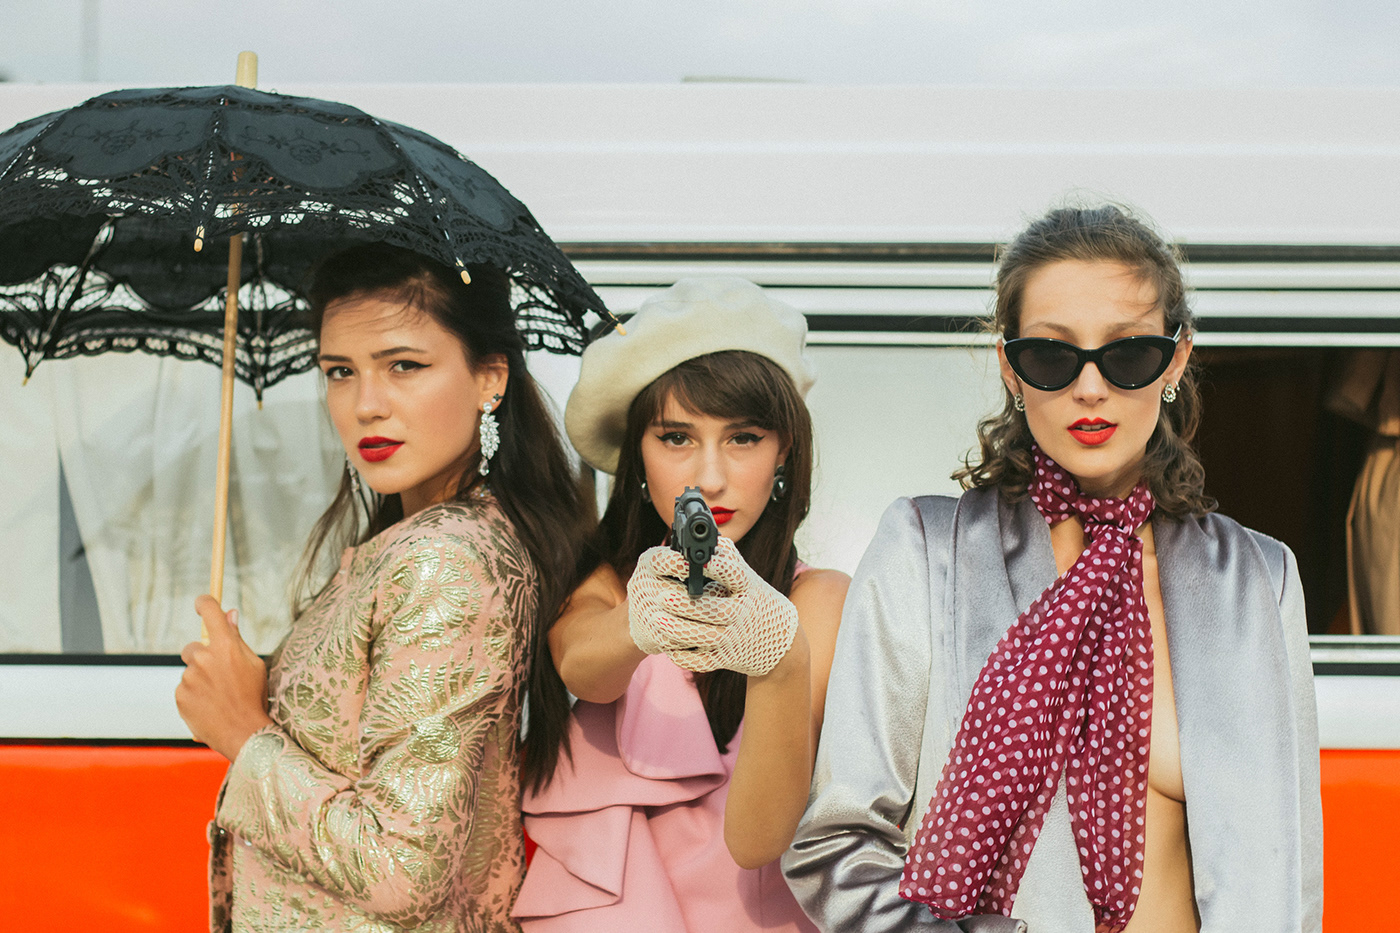 bonnie and clyde charlie's angels Vintage clothing hippie minivan 70's fashion Classy Outfits disco mood girls and guns machineguns Glitter